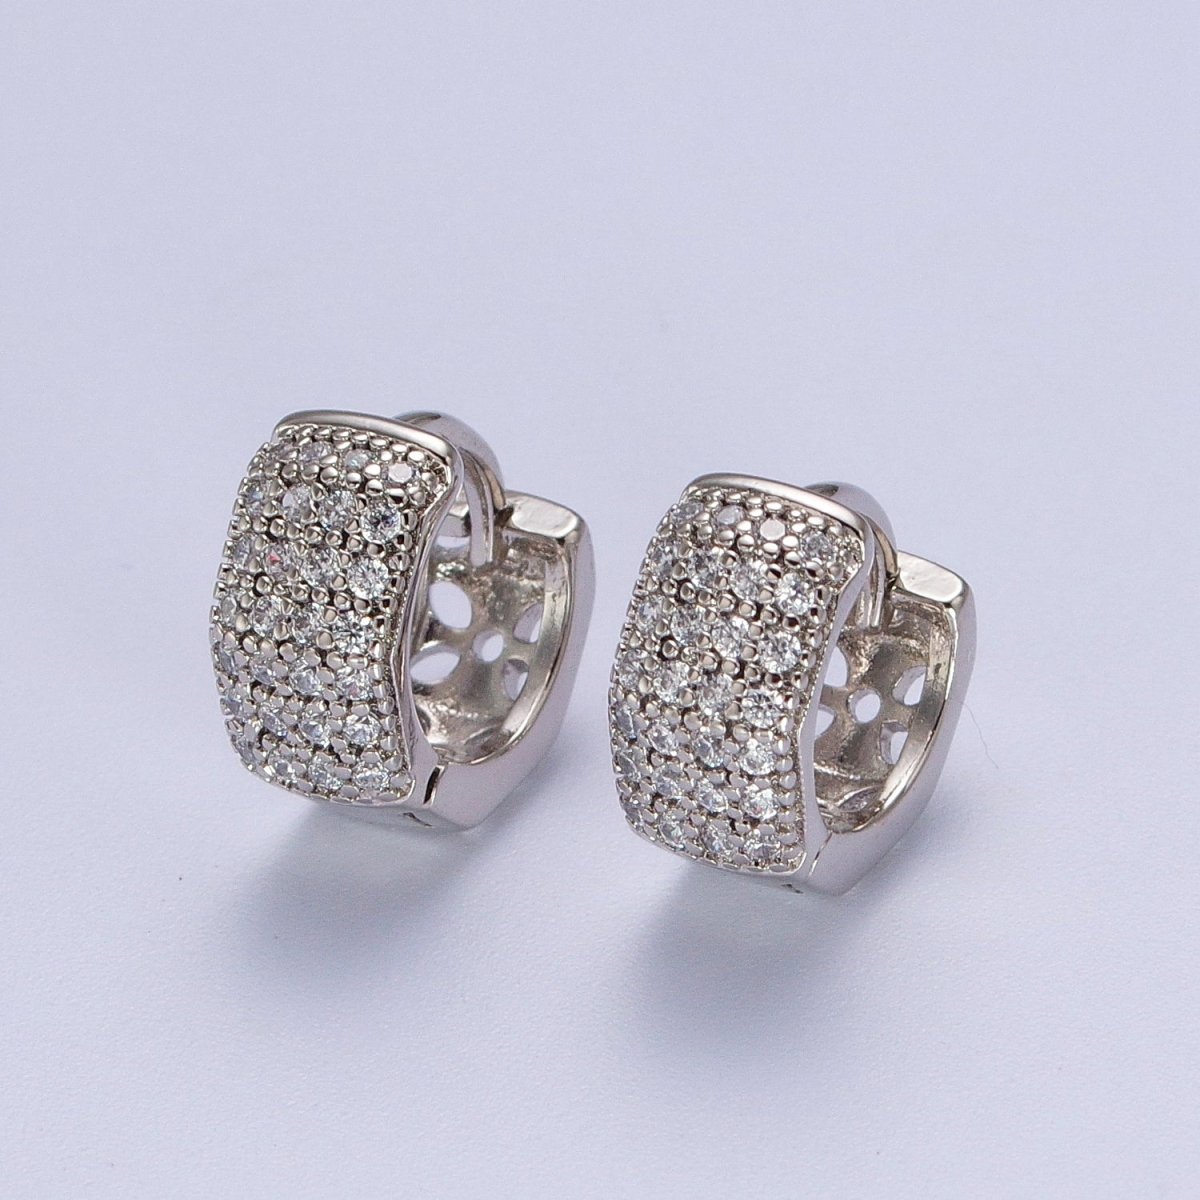 11mm Wide Hexagonal Clear Micro Paved CZ Huggie Earrings in Silver & Pinky Gold P-077 AB-010 - DLUXCA